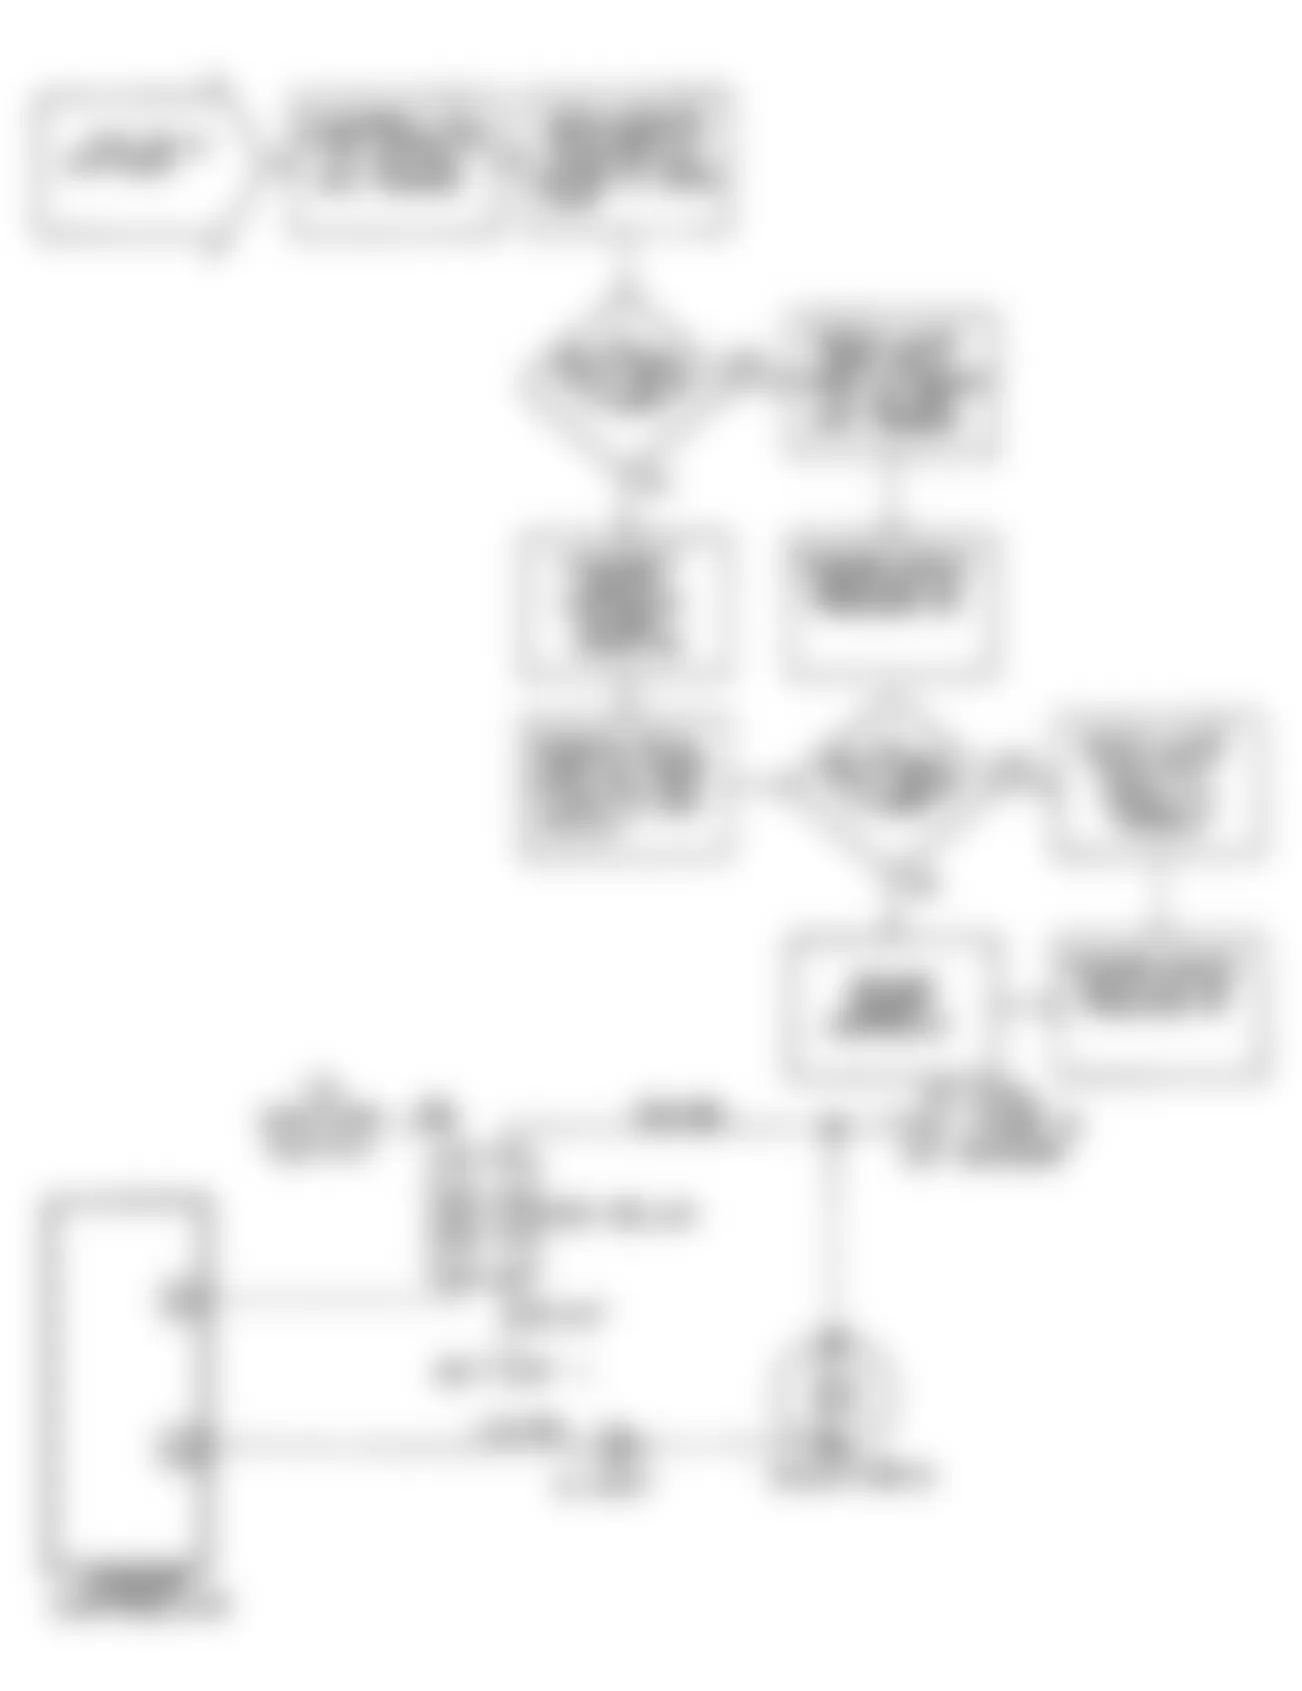 Chrysler LeBaron GTC 1990 - Component Locations -  DR-19: Flow Chart (2 of 2)